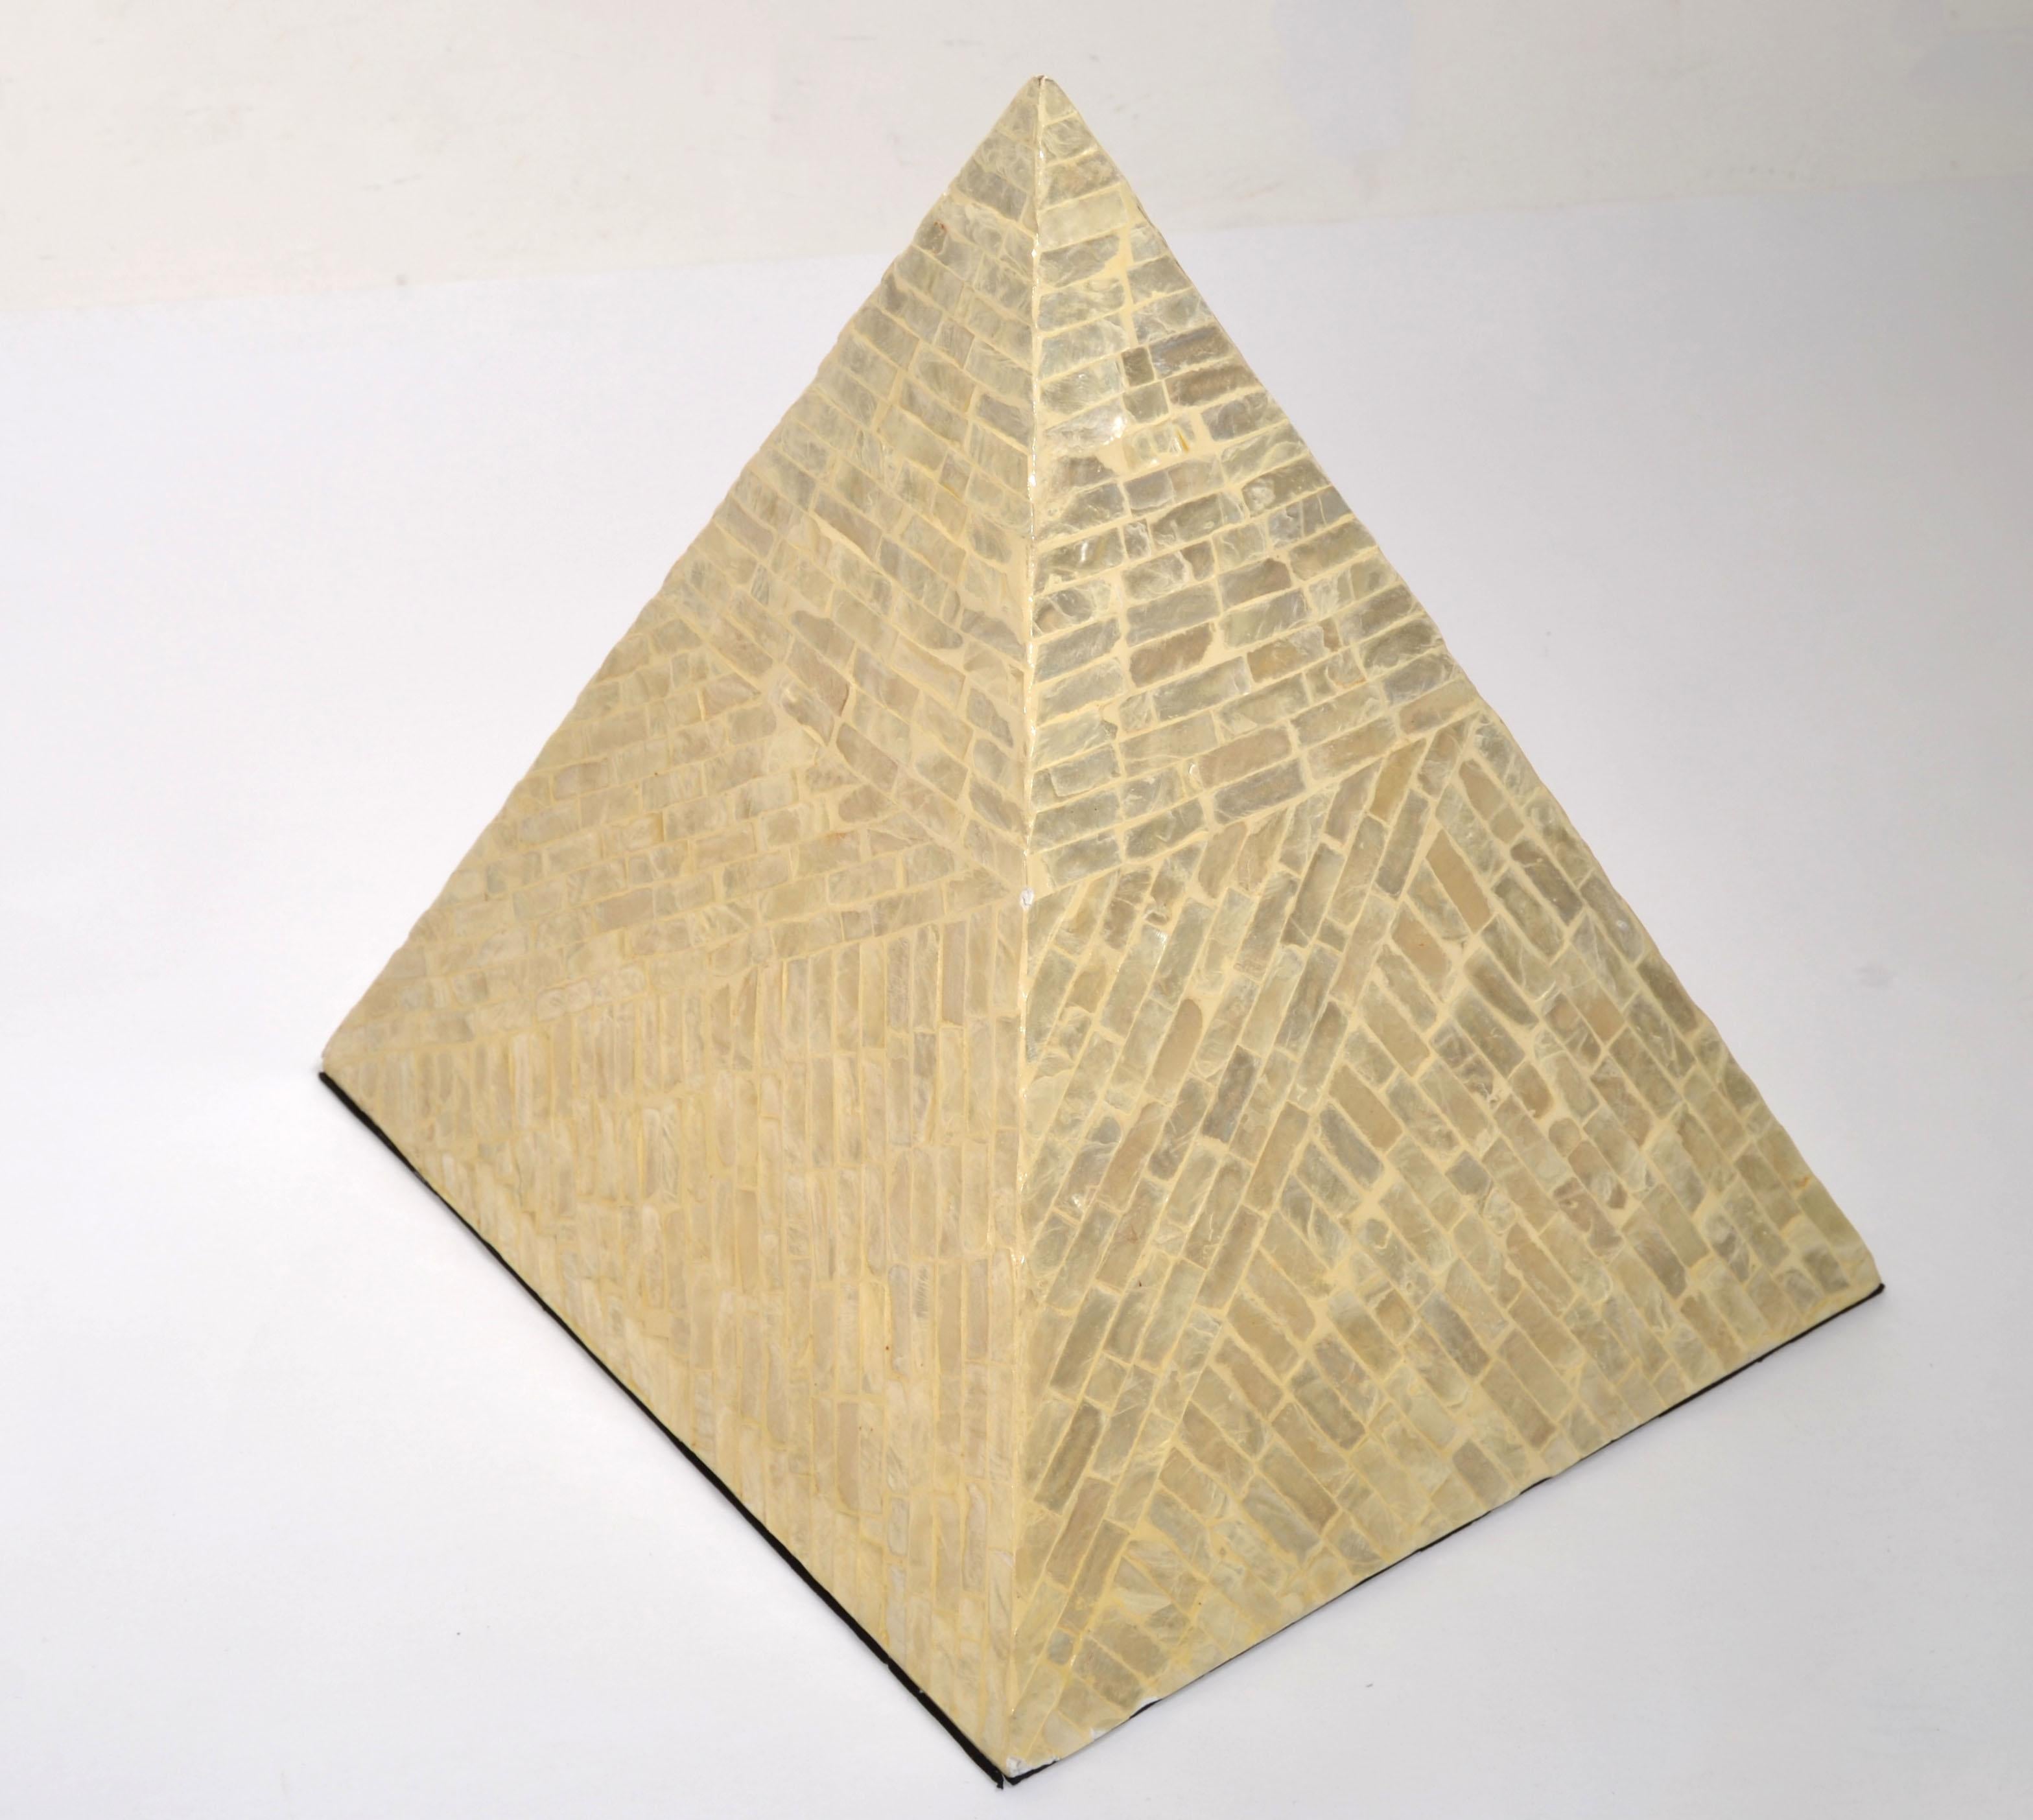 20th Century 1980s Italian Pyramid Mother Of Pearl Wood Sculpture Decorative Object Fine Art  For Sale